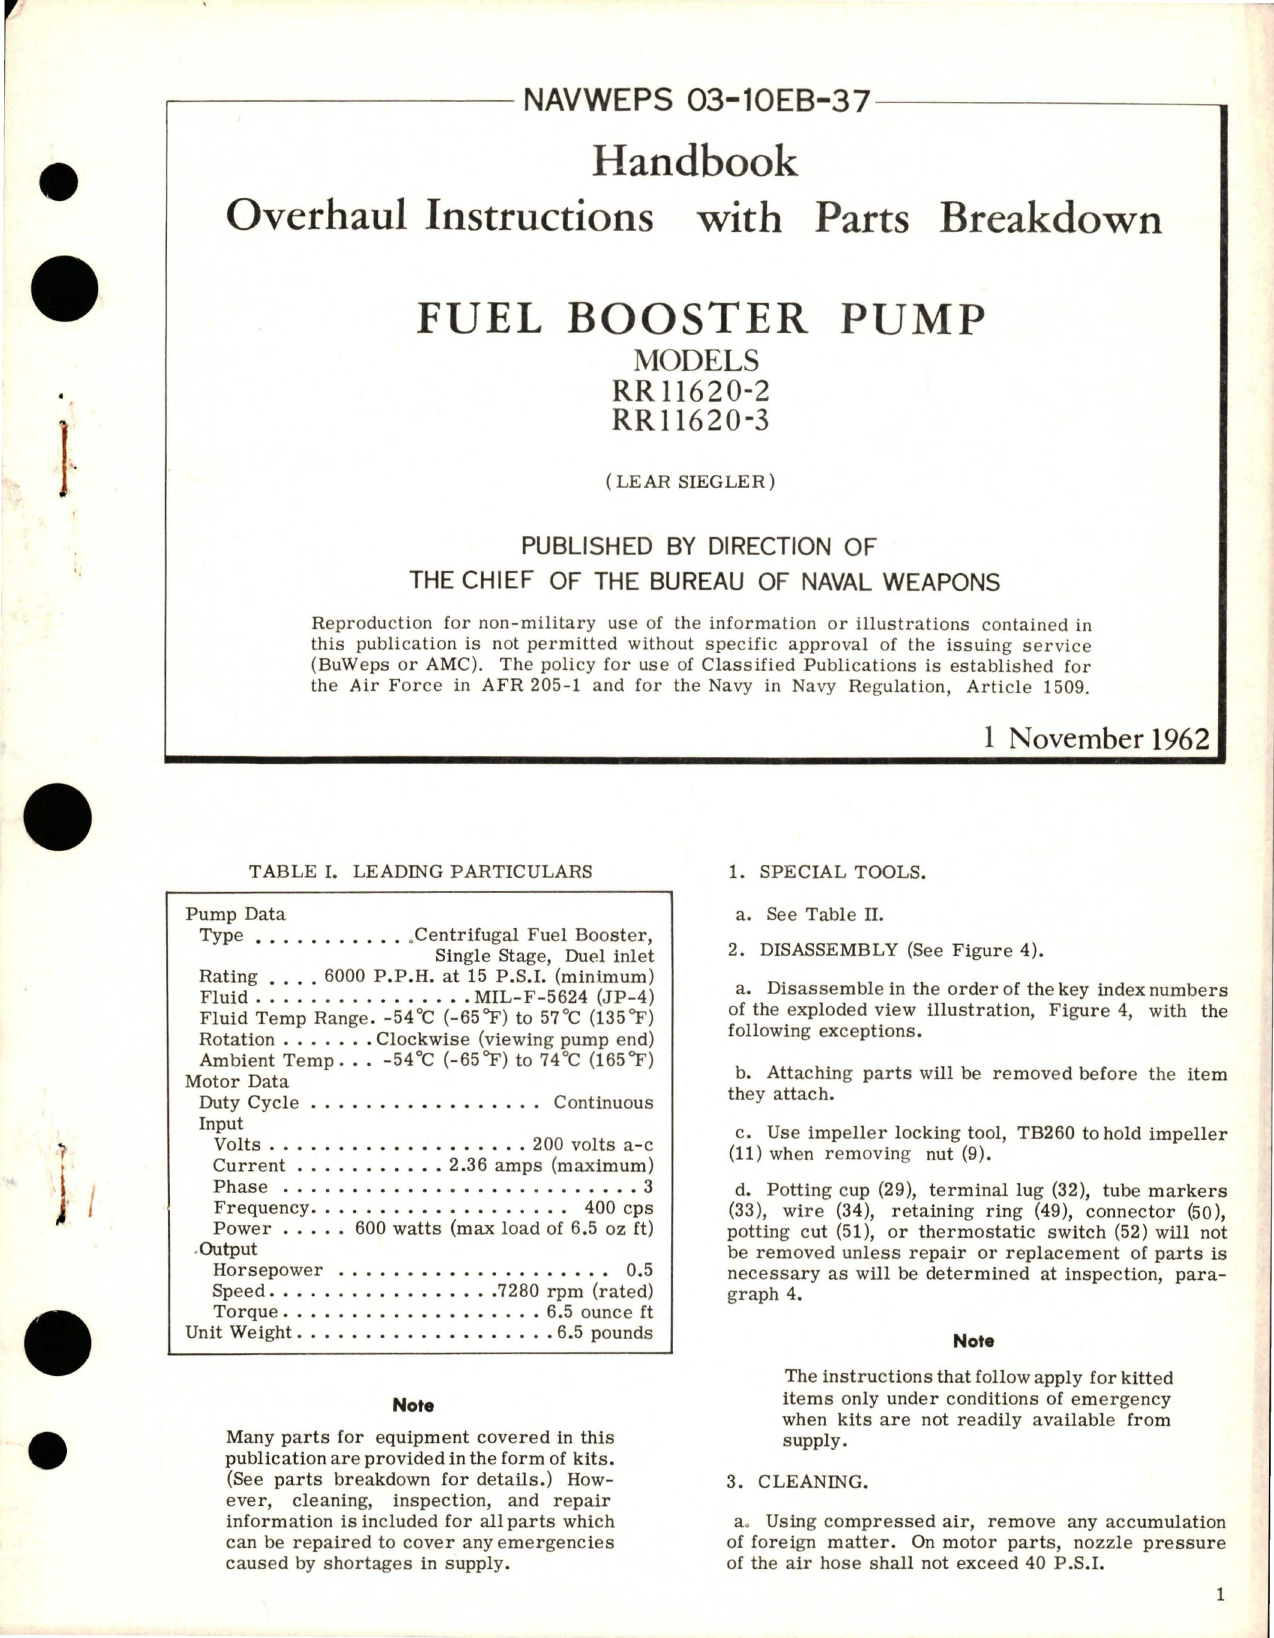 Sample page 1 from AirCorps Library document: Overhaul Instructions with Parts Breakdown for Fuel Booster Pump - Model RR11620-2 and RR11620-3